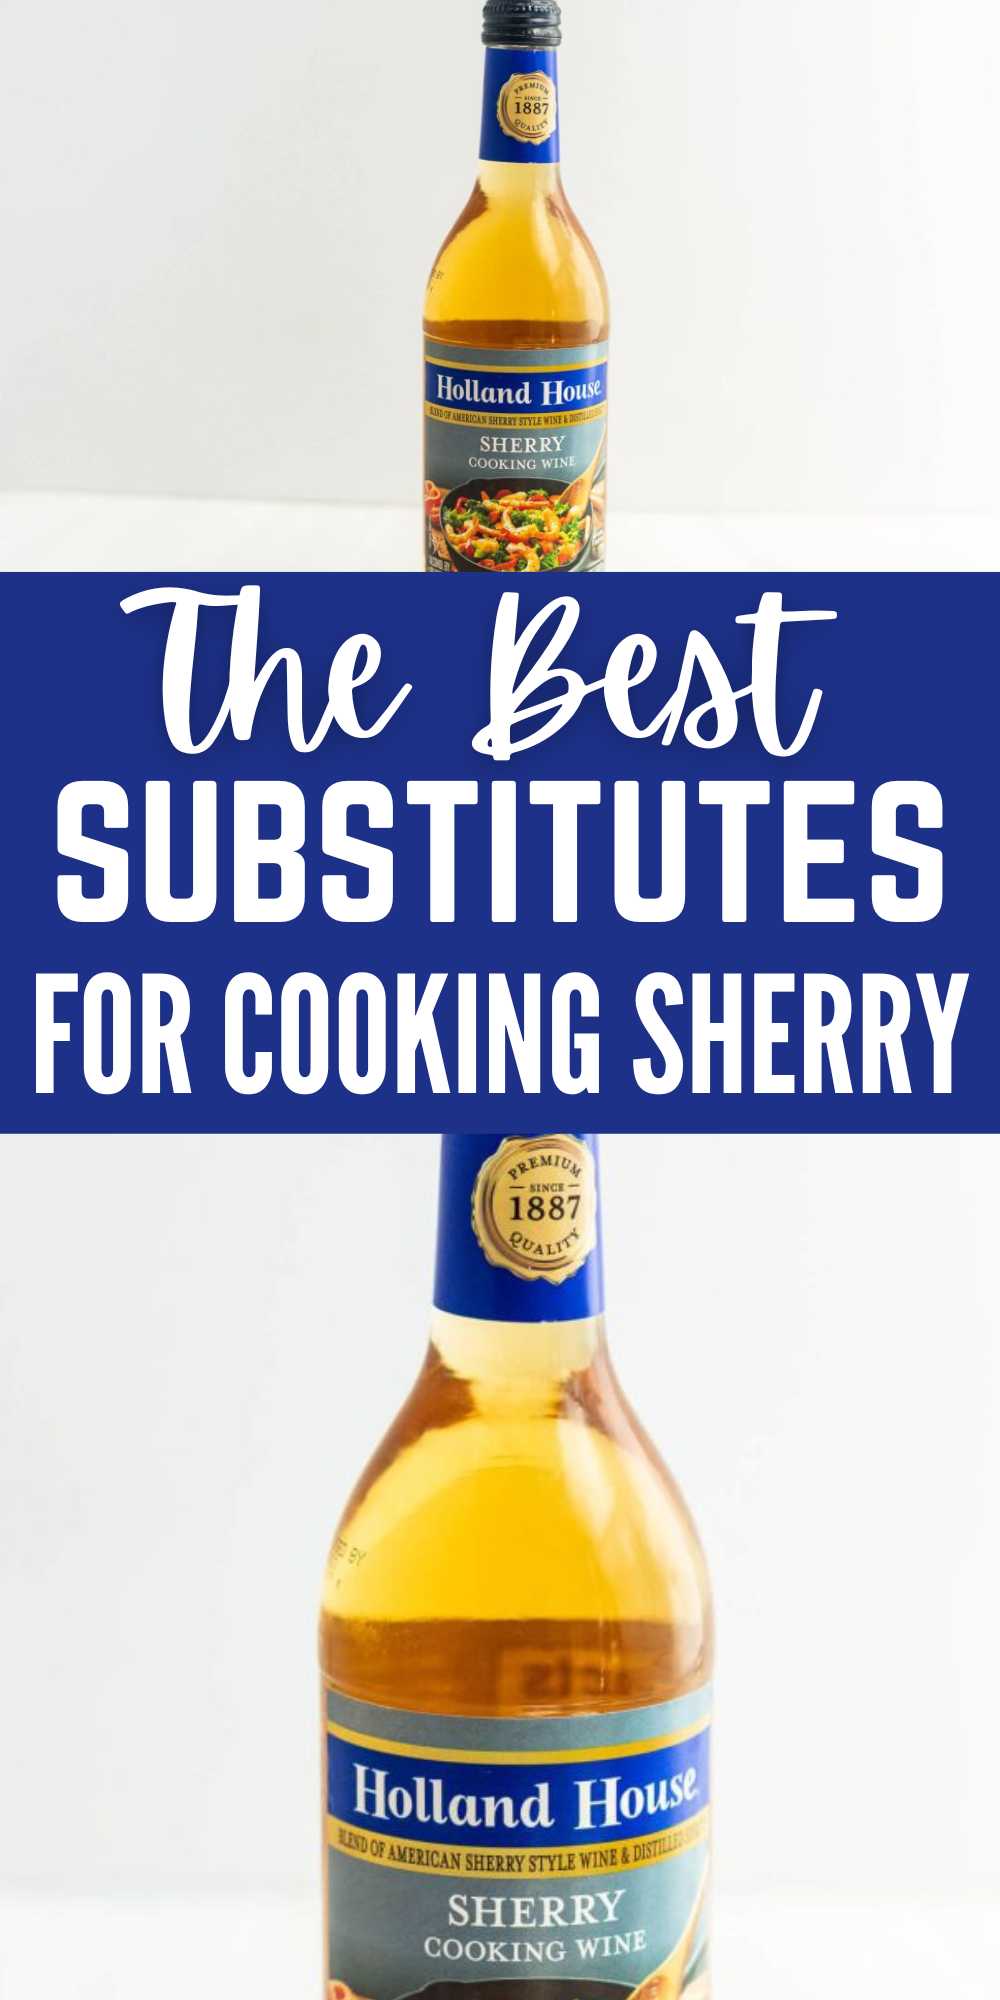 Learn the best substitute for cooking Sherry. We are going to walk you through some cooking sherry substitutes in recipes that are easy. Sherry typically has a nutty, slightly sweet flavor along with a distinct acidity. #eatingonadime #cookingsherry #substitutesforcookingsherry